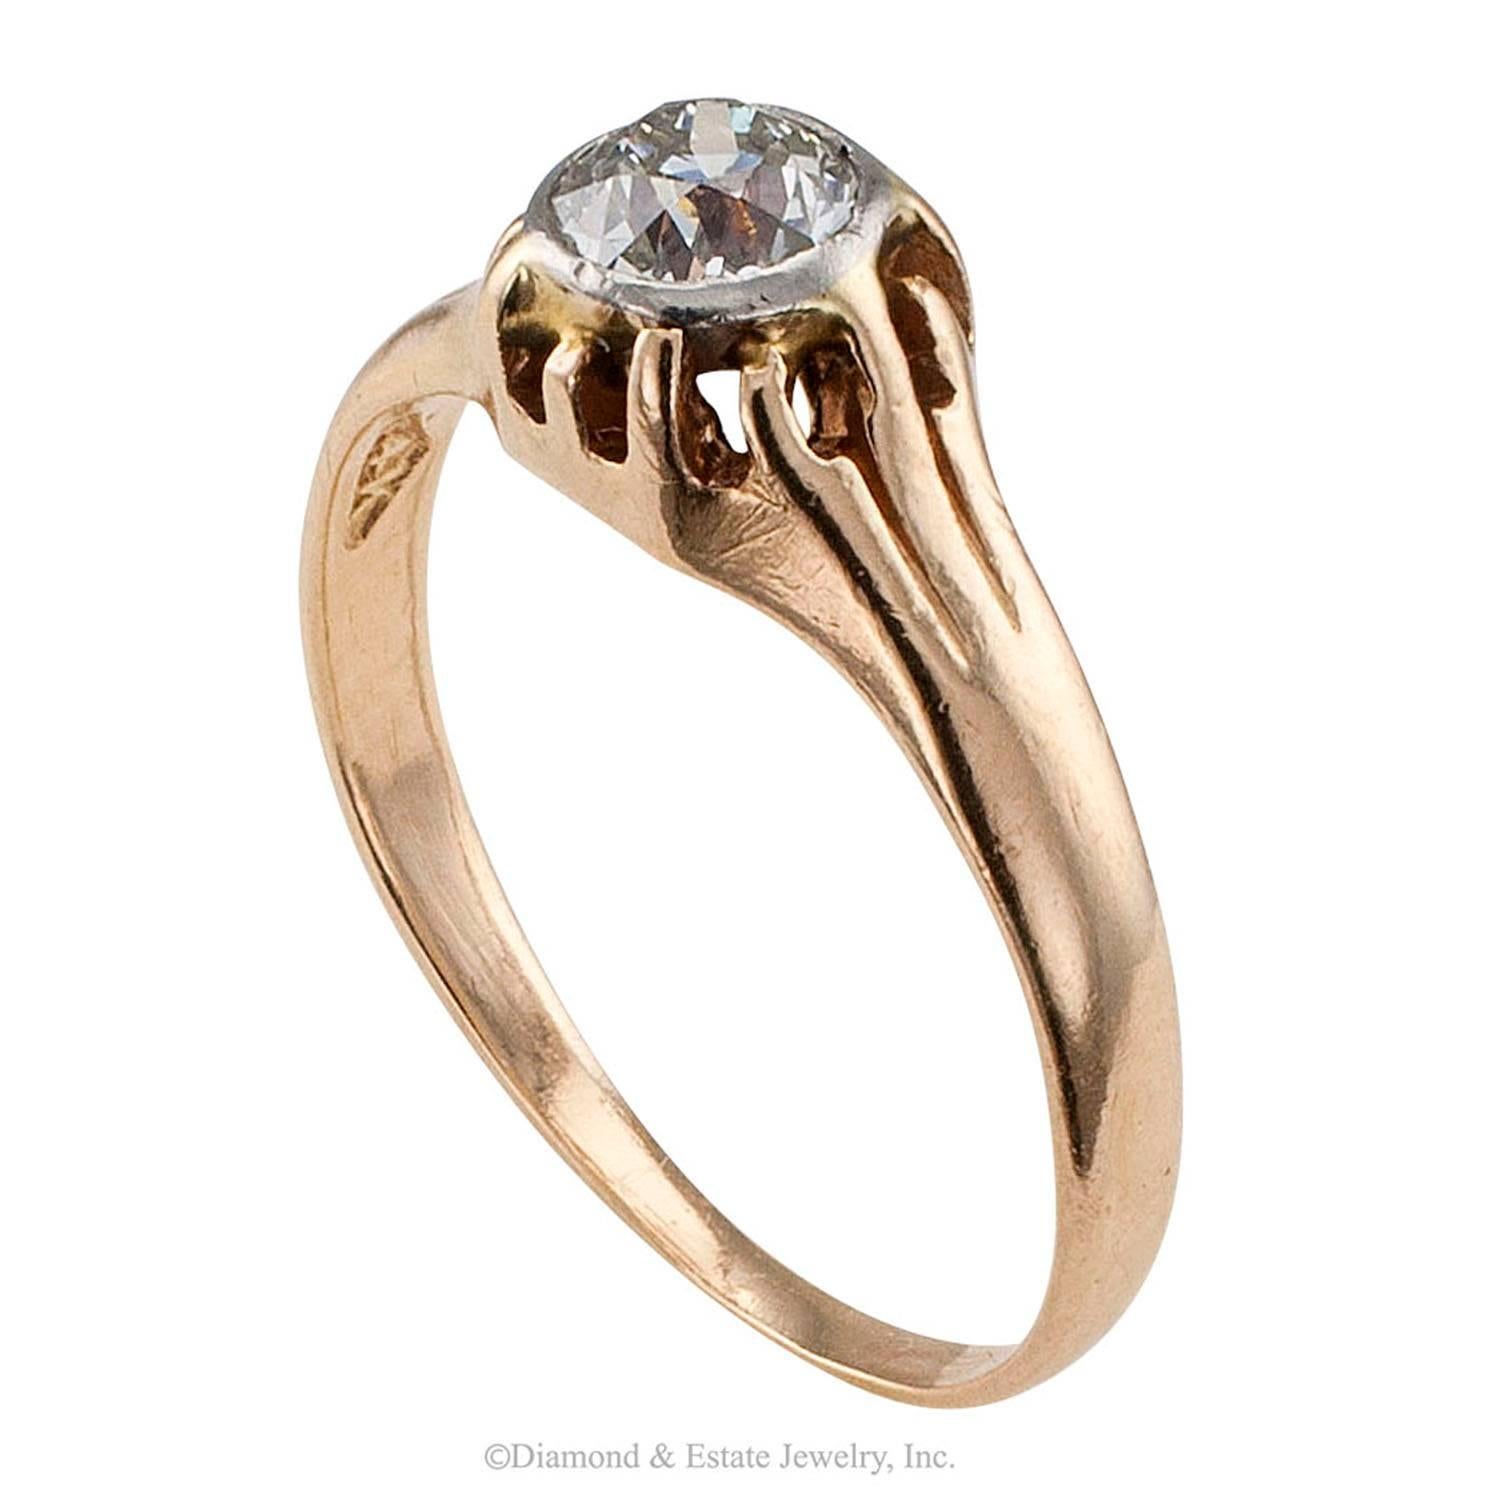 Victorian 0.35 Carat Diamond Gold Engagement Ring

Victorian 0.35 carat old mine-cut diamond solitaire gold engagement ring circa 1890.  The single, approximately 0.35 carat, approximately J color and SI1 clarity, old mine-cut diamond crowns the